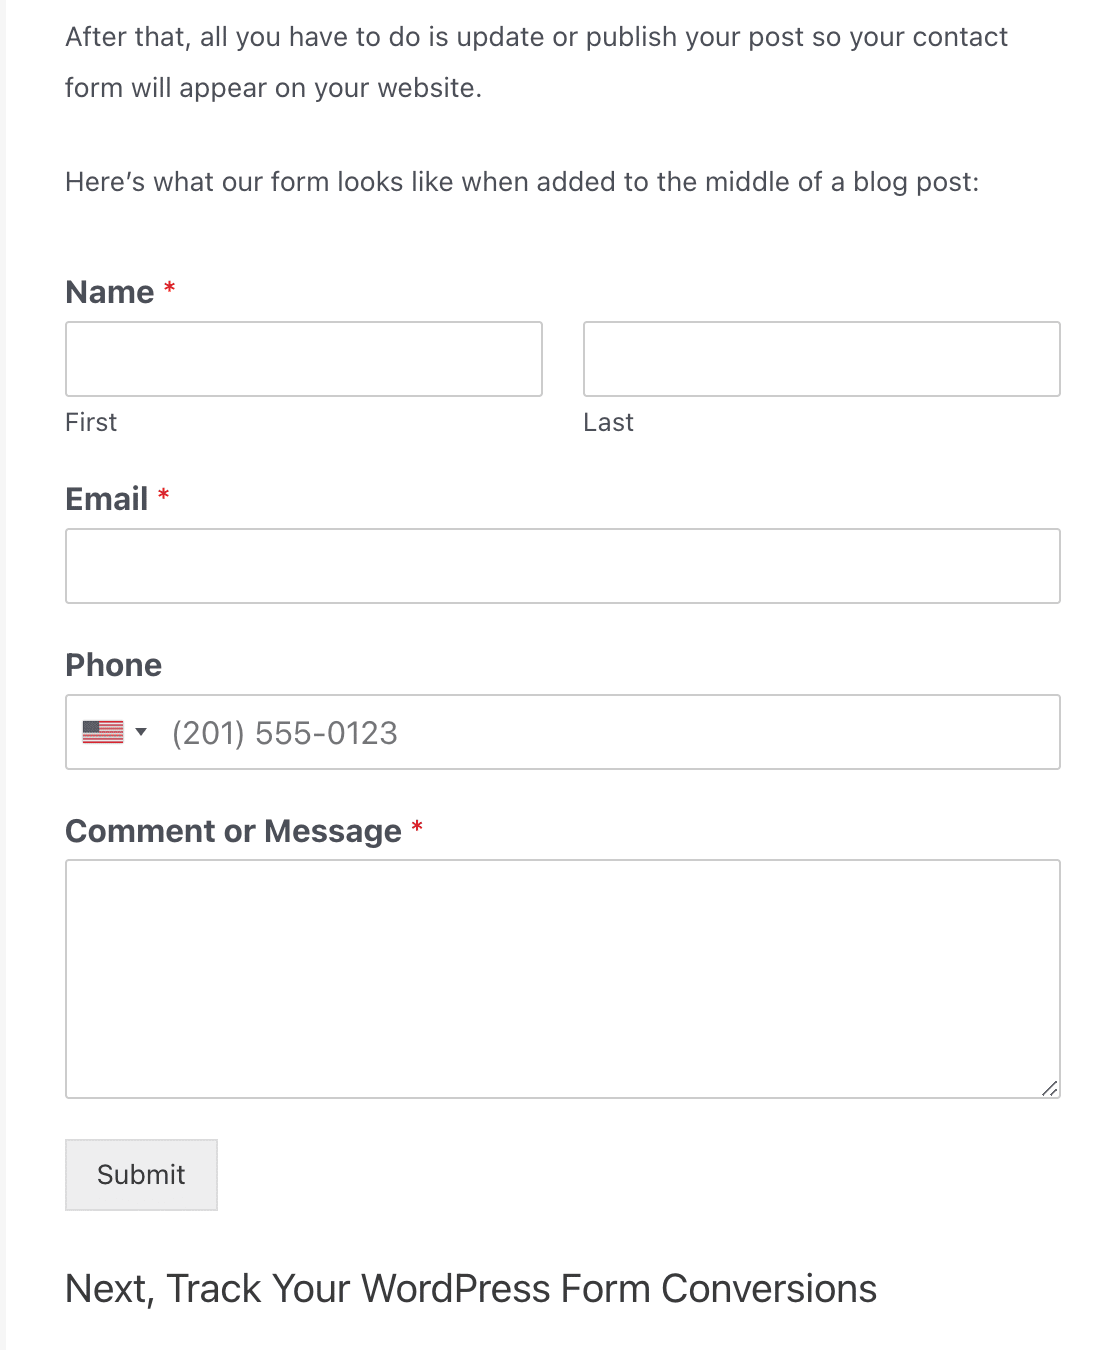 A contact form in a blog post